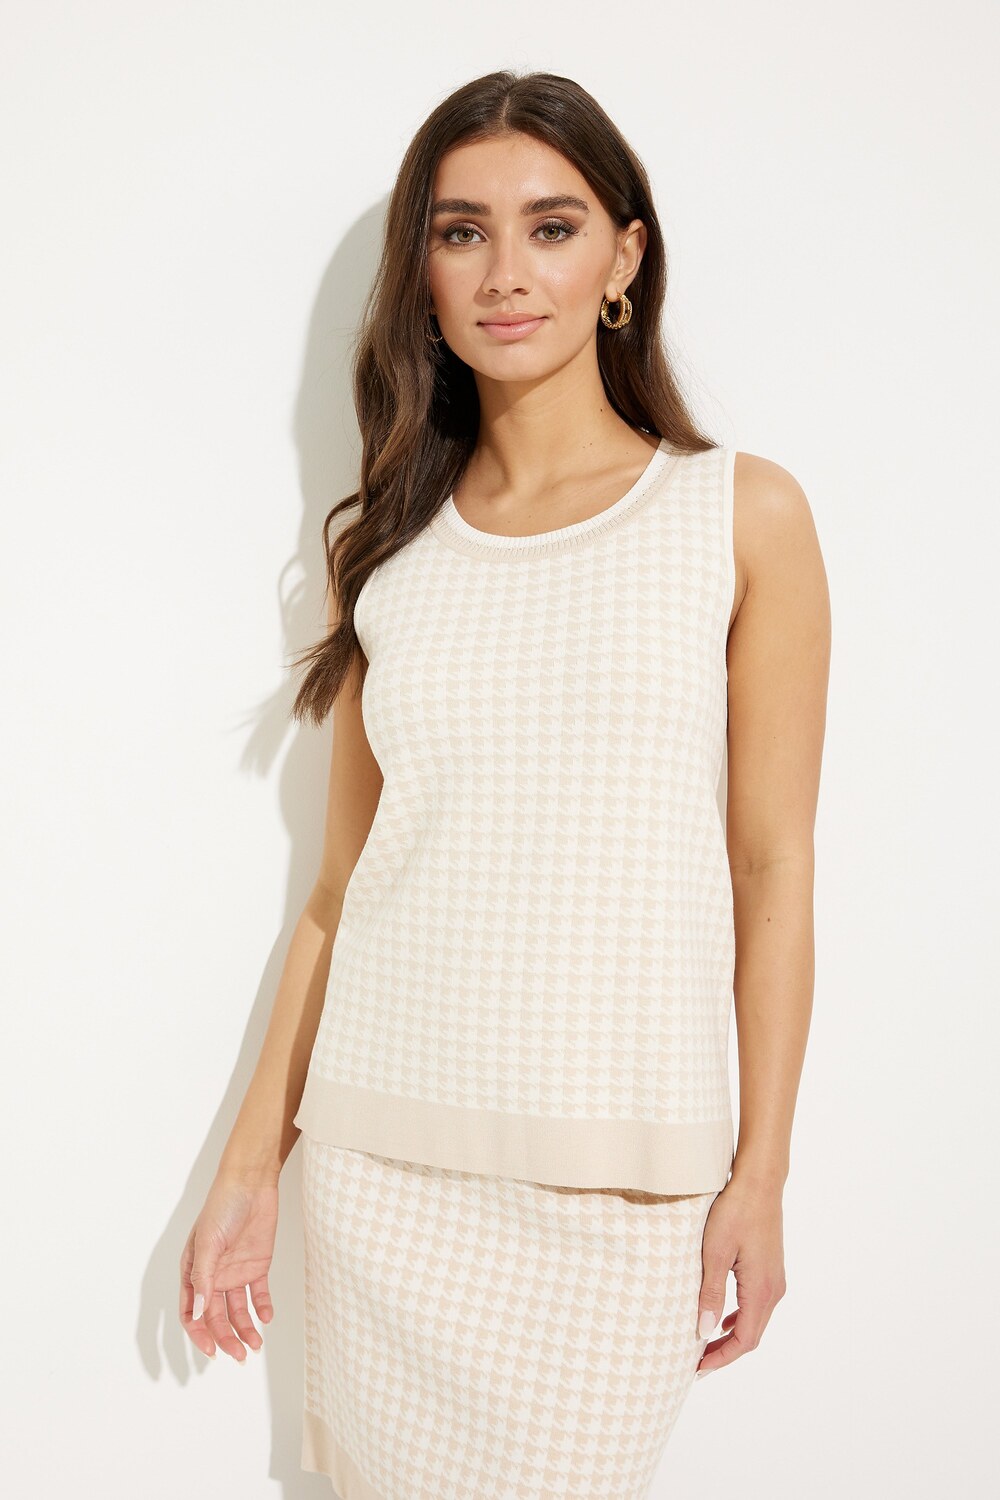 Houndstooth Print Sleeveless Top Style SP2345. Ivory Sand 